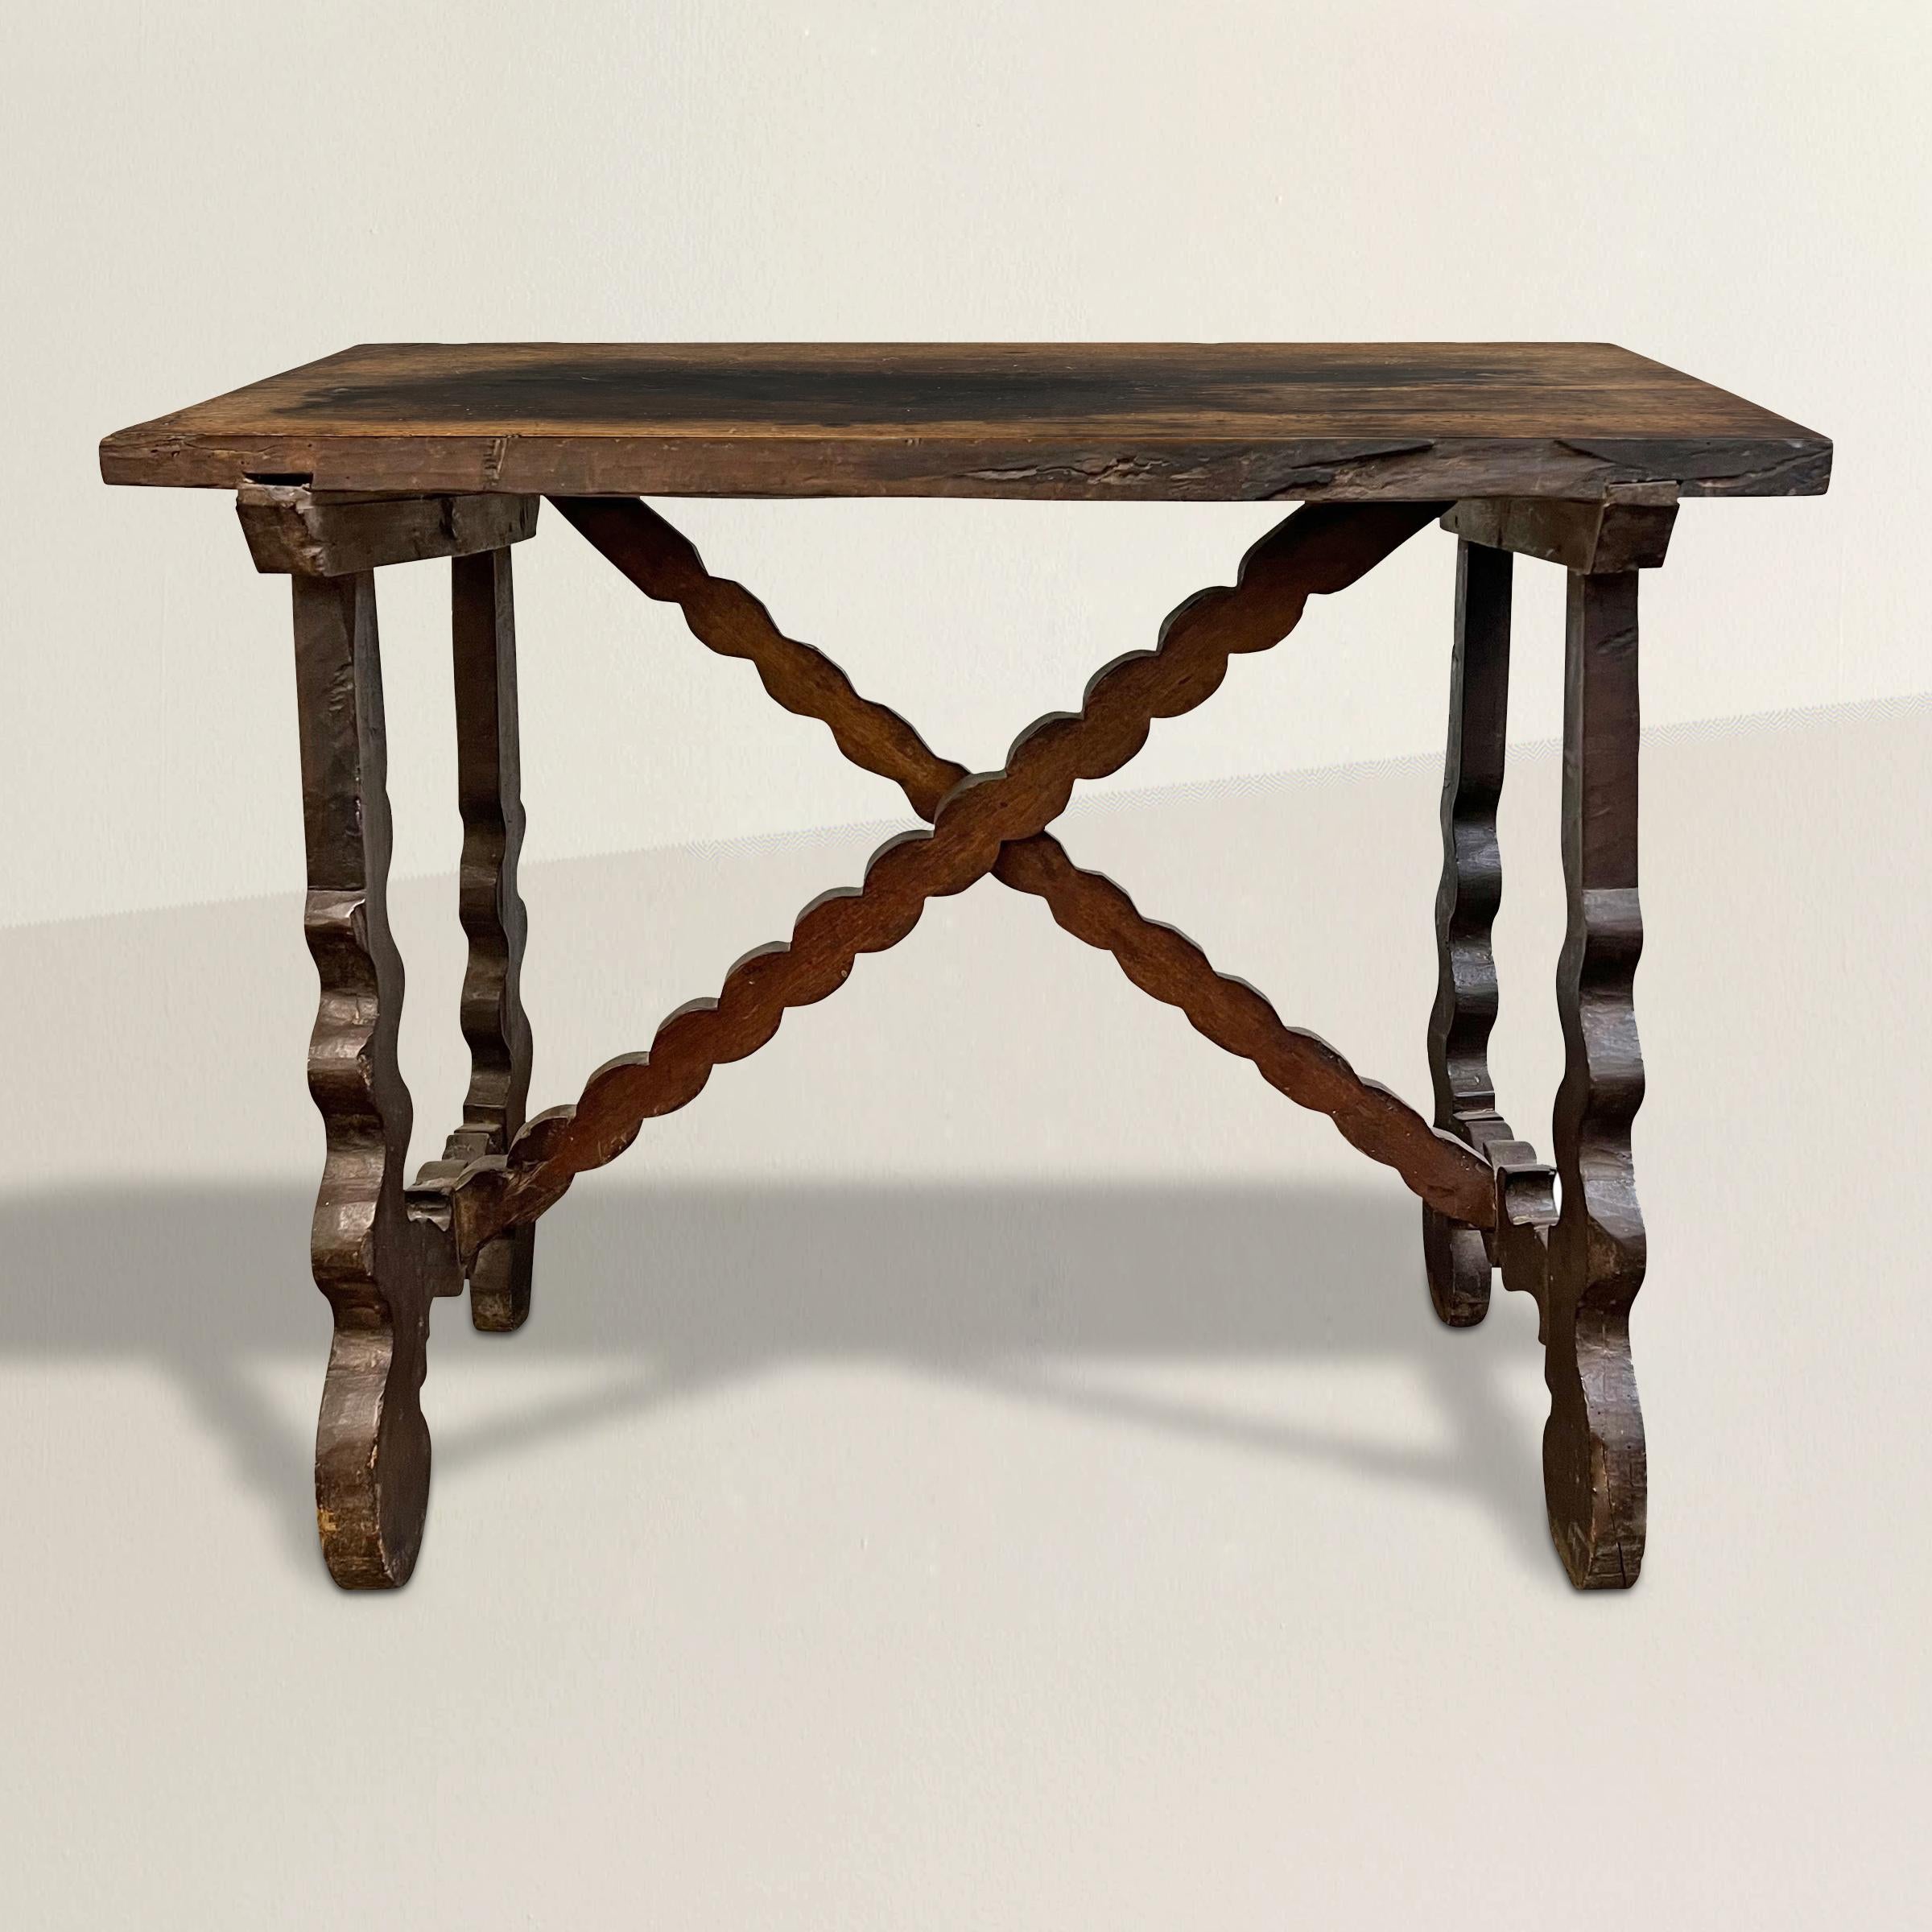 Step into the rich history of Northern Italy with this exquisite 18th century Italian Baroque walnut table, a true testament to the craftsmanship and artistic legacy of the region. Carved from luxurious walnut wood, this table showcases the elegance